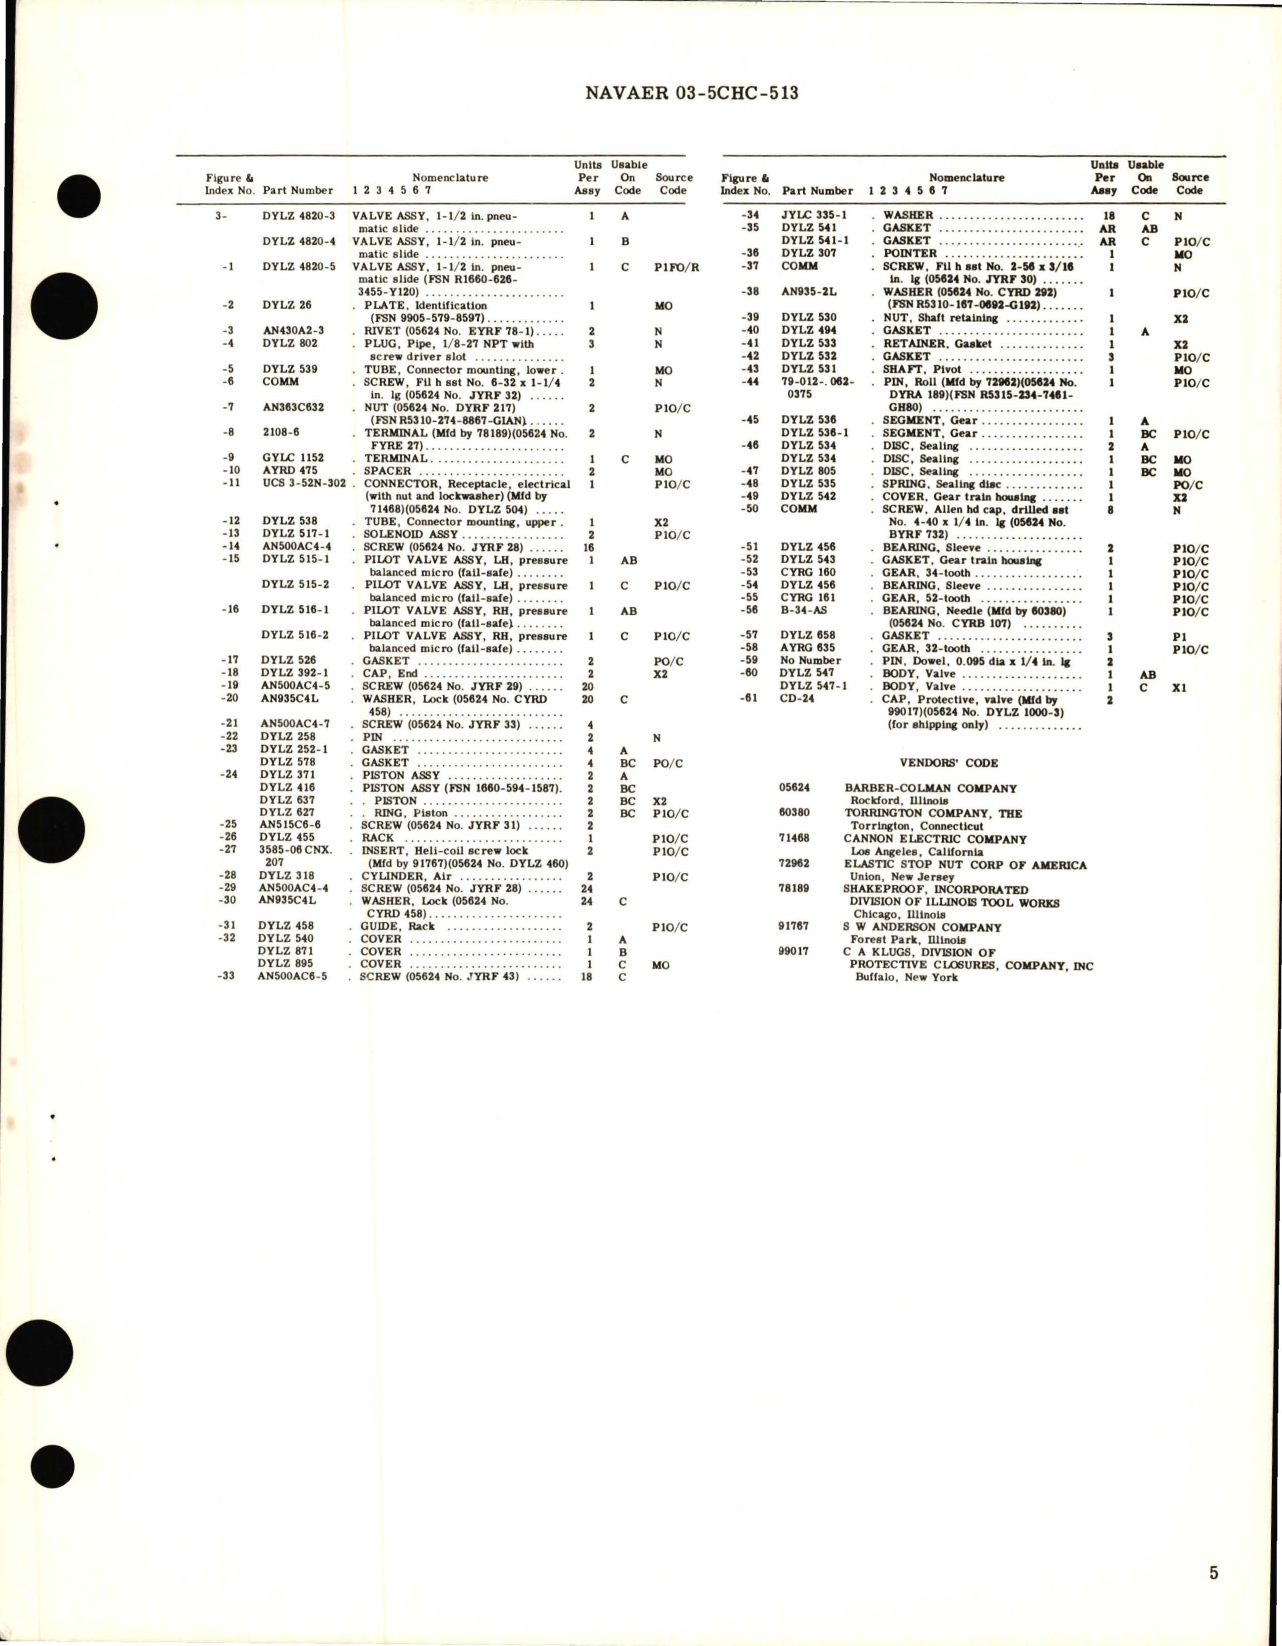 Sample page 5 from AirCorps Library document: Overhaul Instructions with Parts Breakdown for Pneumatic Slide Valve 1.5 Inch - DYLZ 4820-3, DYLZ 4820-4, DYLZ 4820-5 